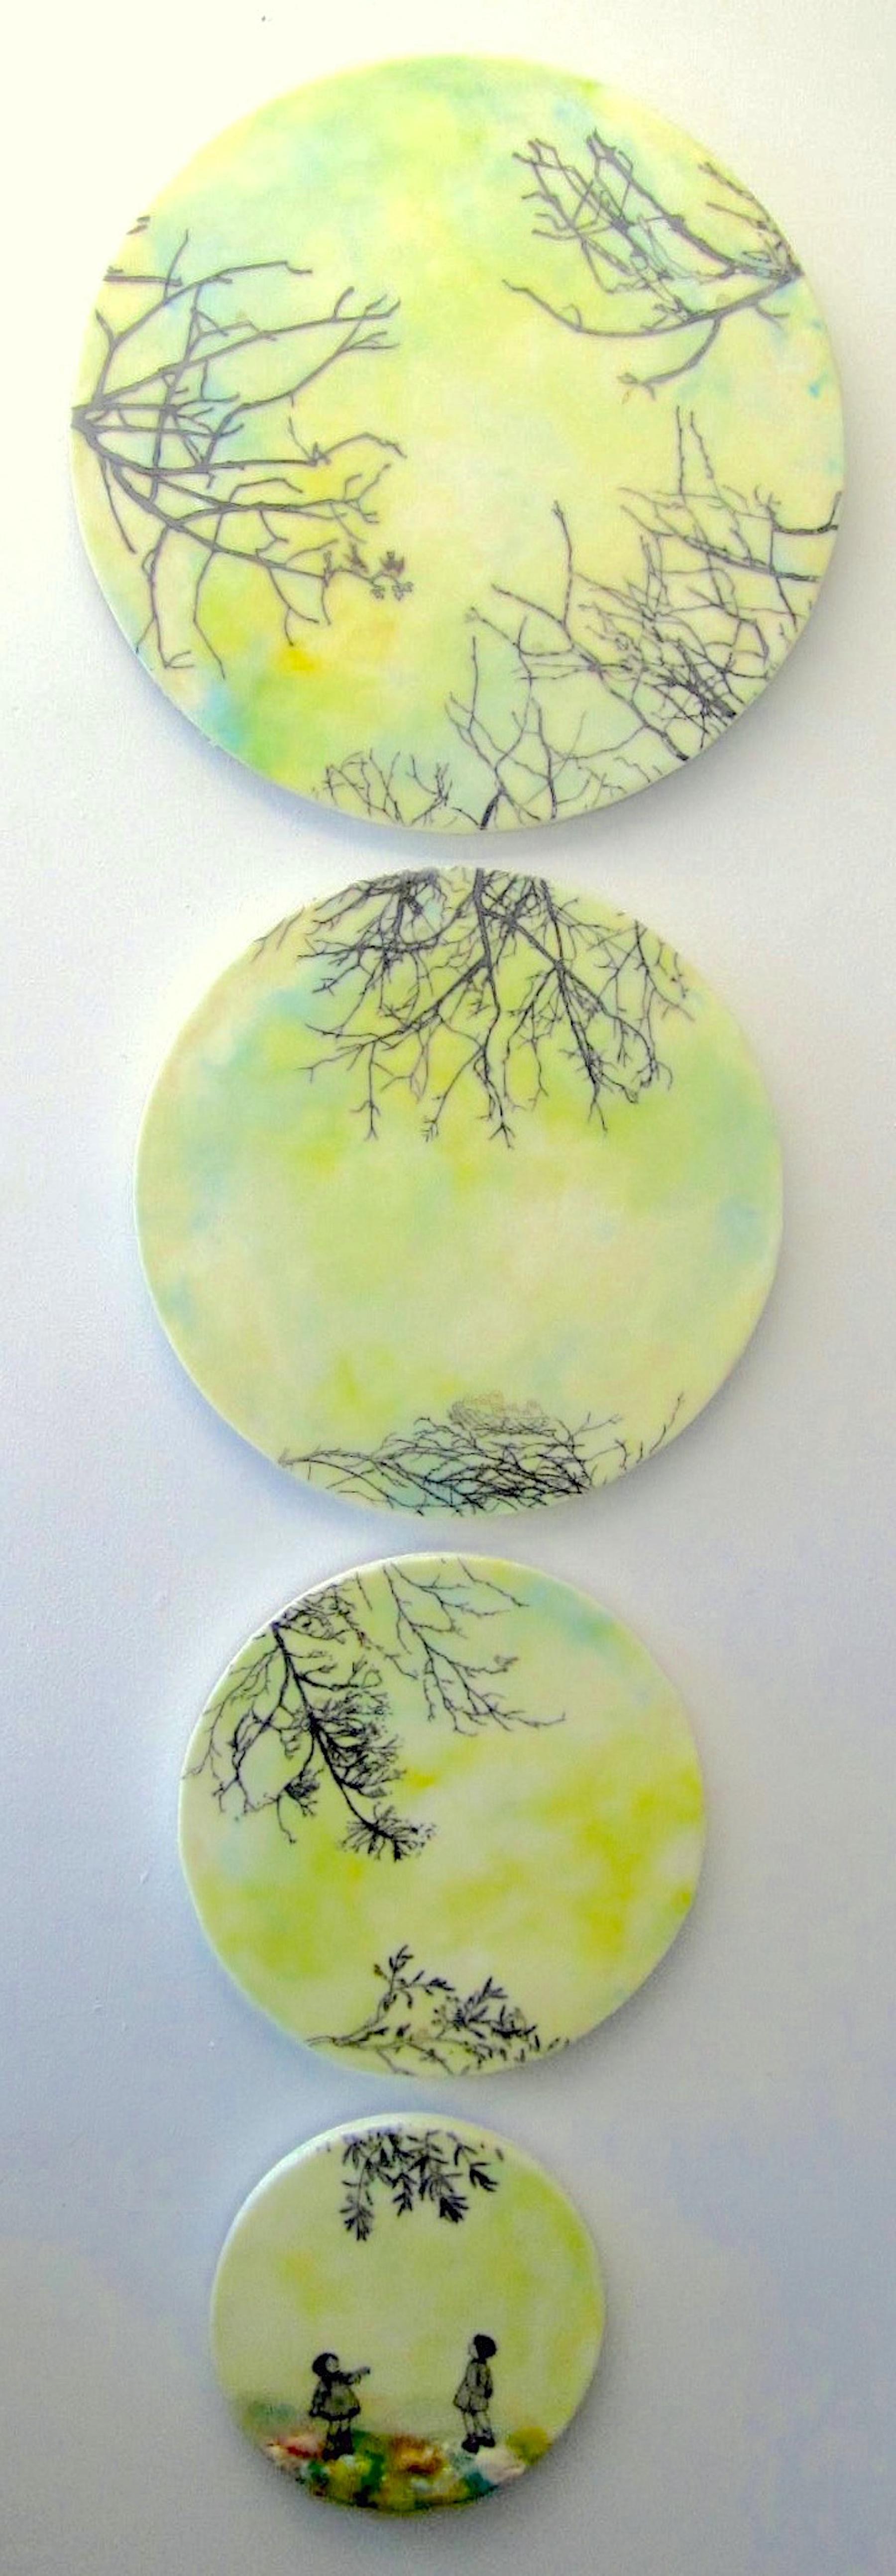 Cecile Chong Figurative Painting - Branches Everywhere, Blue, Ivory, Yellow Children, Trees, Circular Encaustic